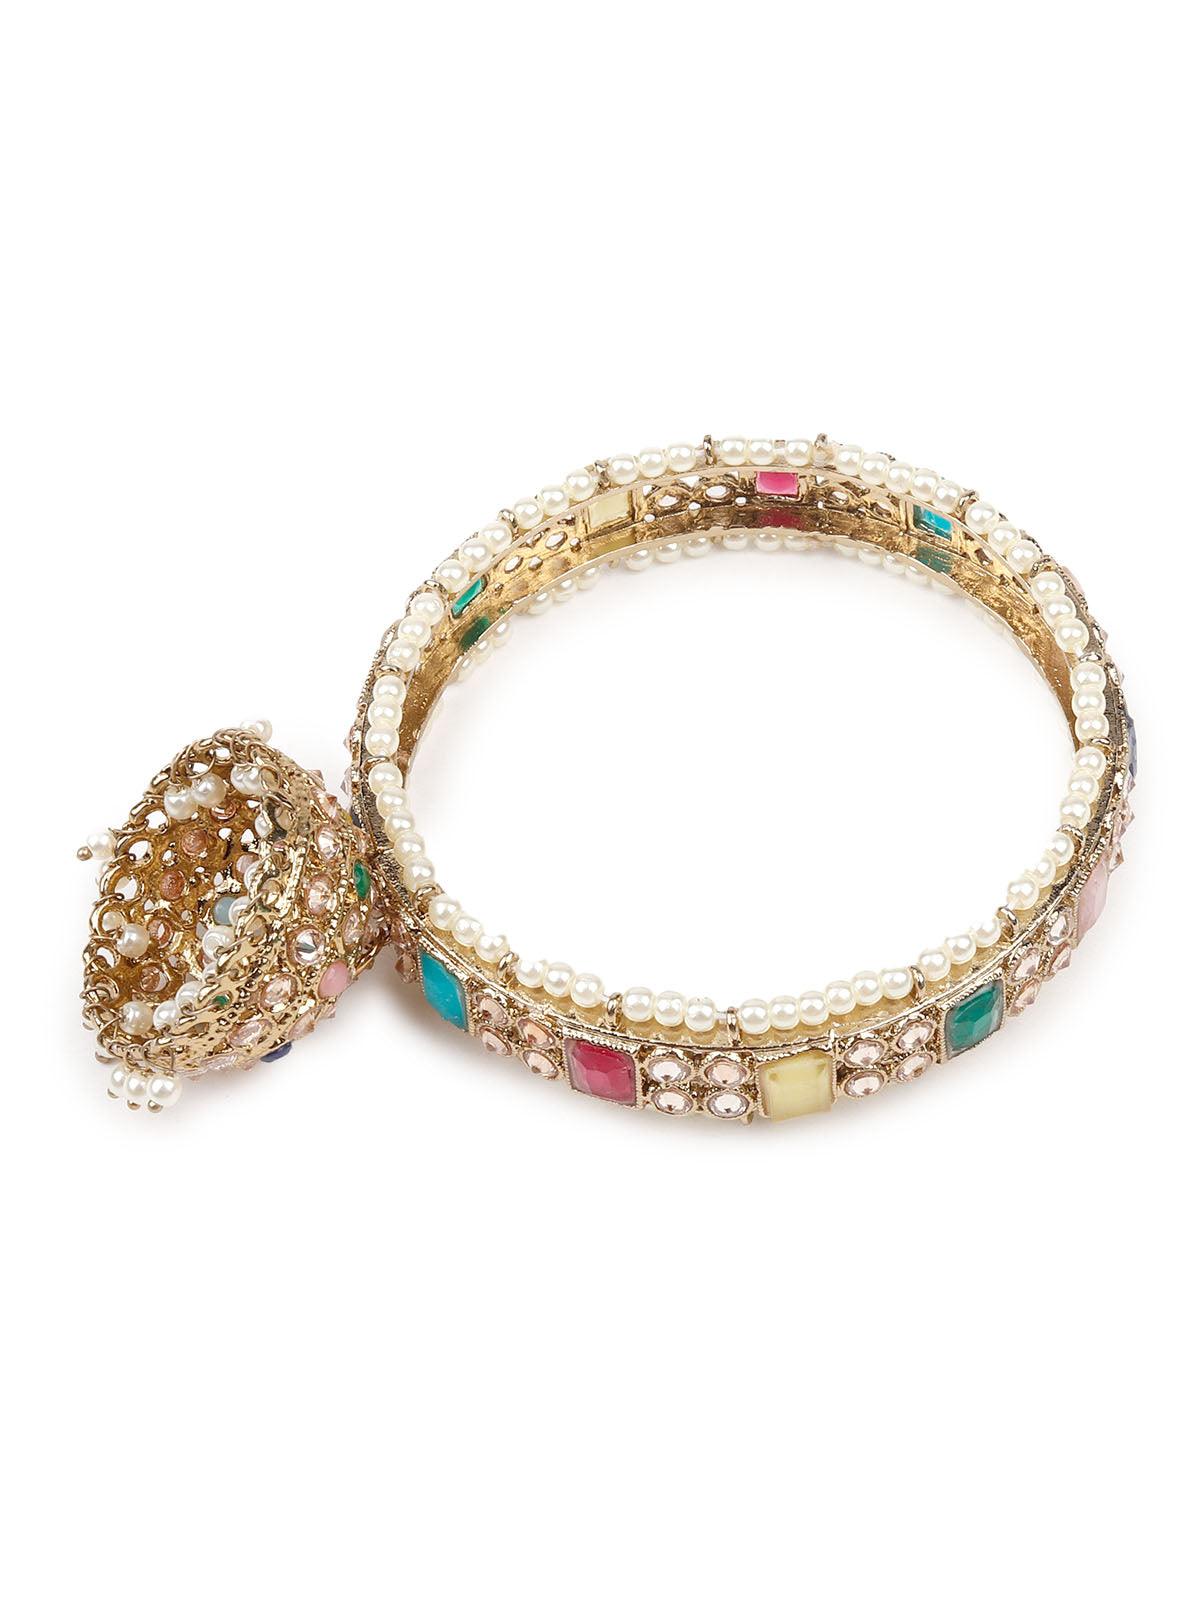 Gorgeous embellished pair Kada for women - Odette